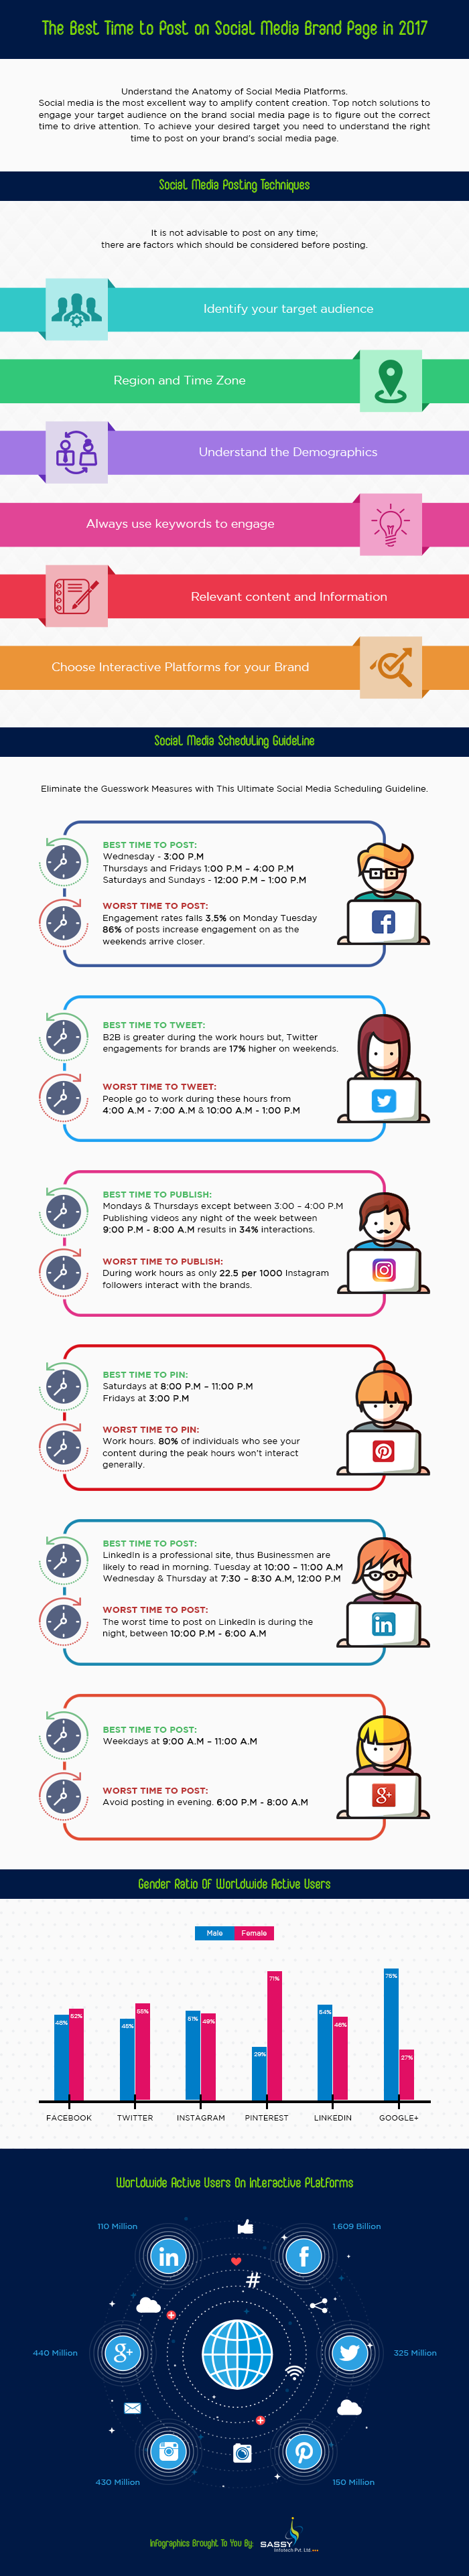 Best Time to Post on Social Media Brand Pages 2017